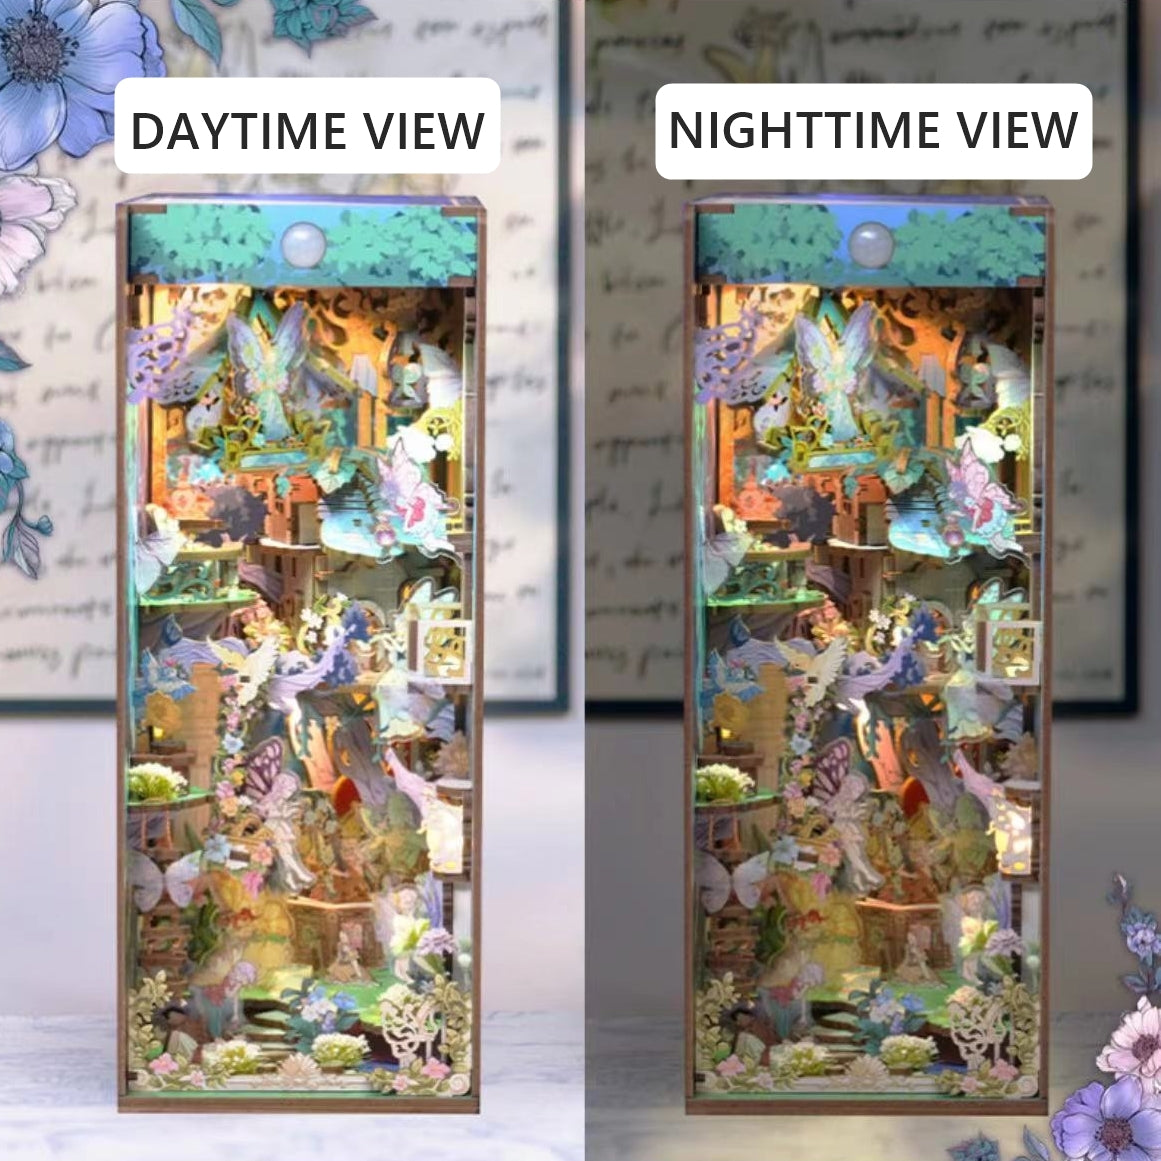 A Midsummer Night's Dream theme DIY Book Nook Kit, bookshelf insert decor diorama, 3d puzzles bookend, miniature house crafts - daytime and nighttime view